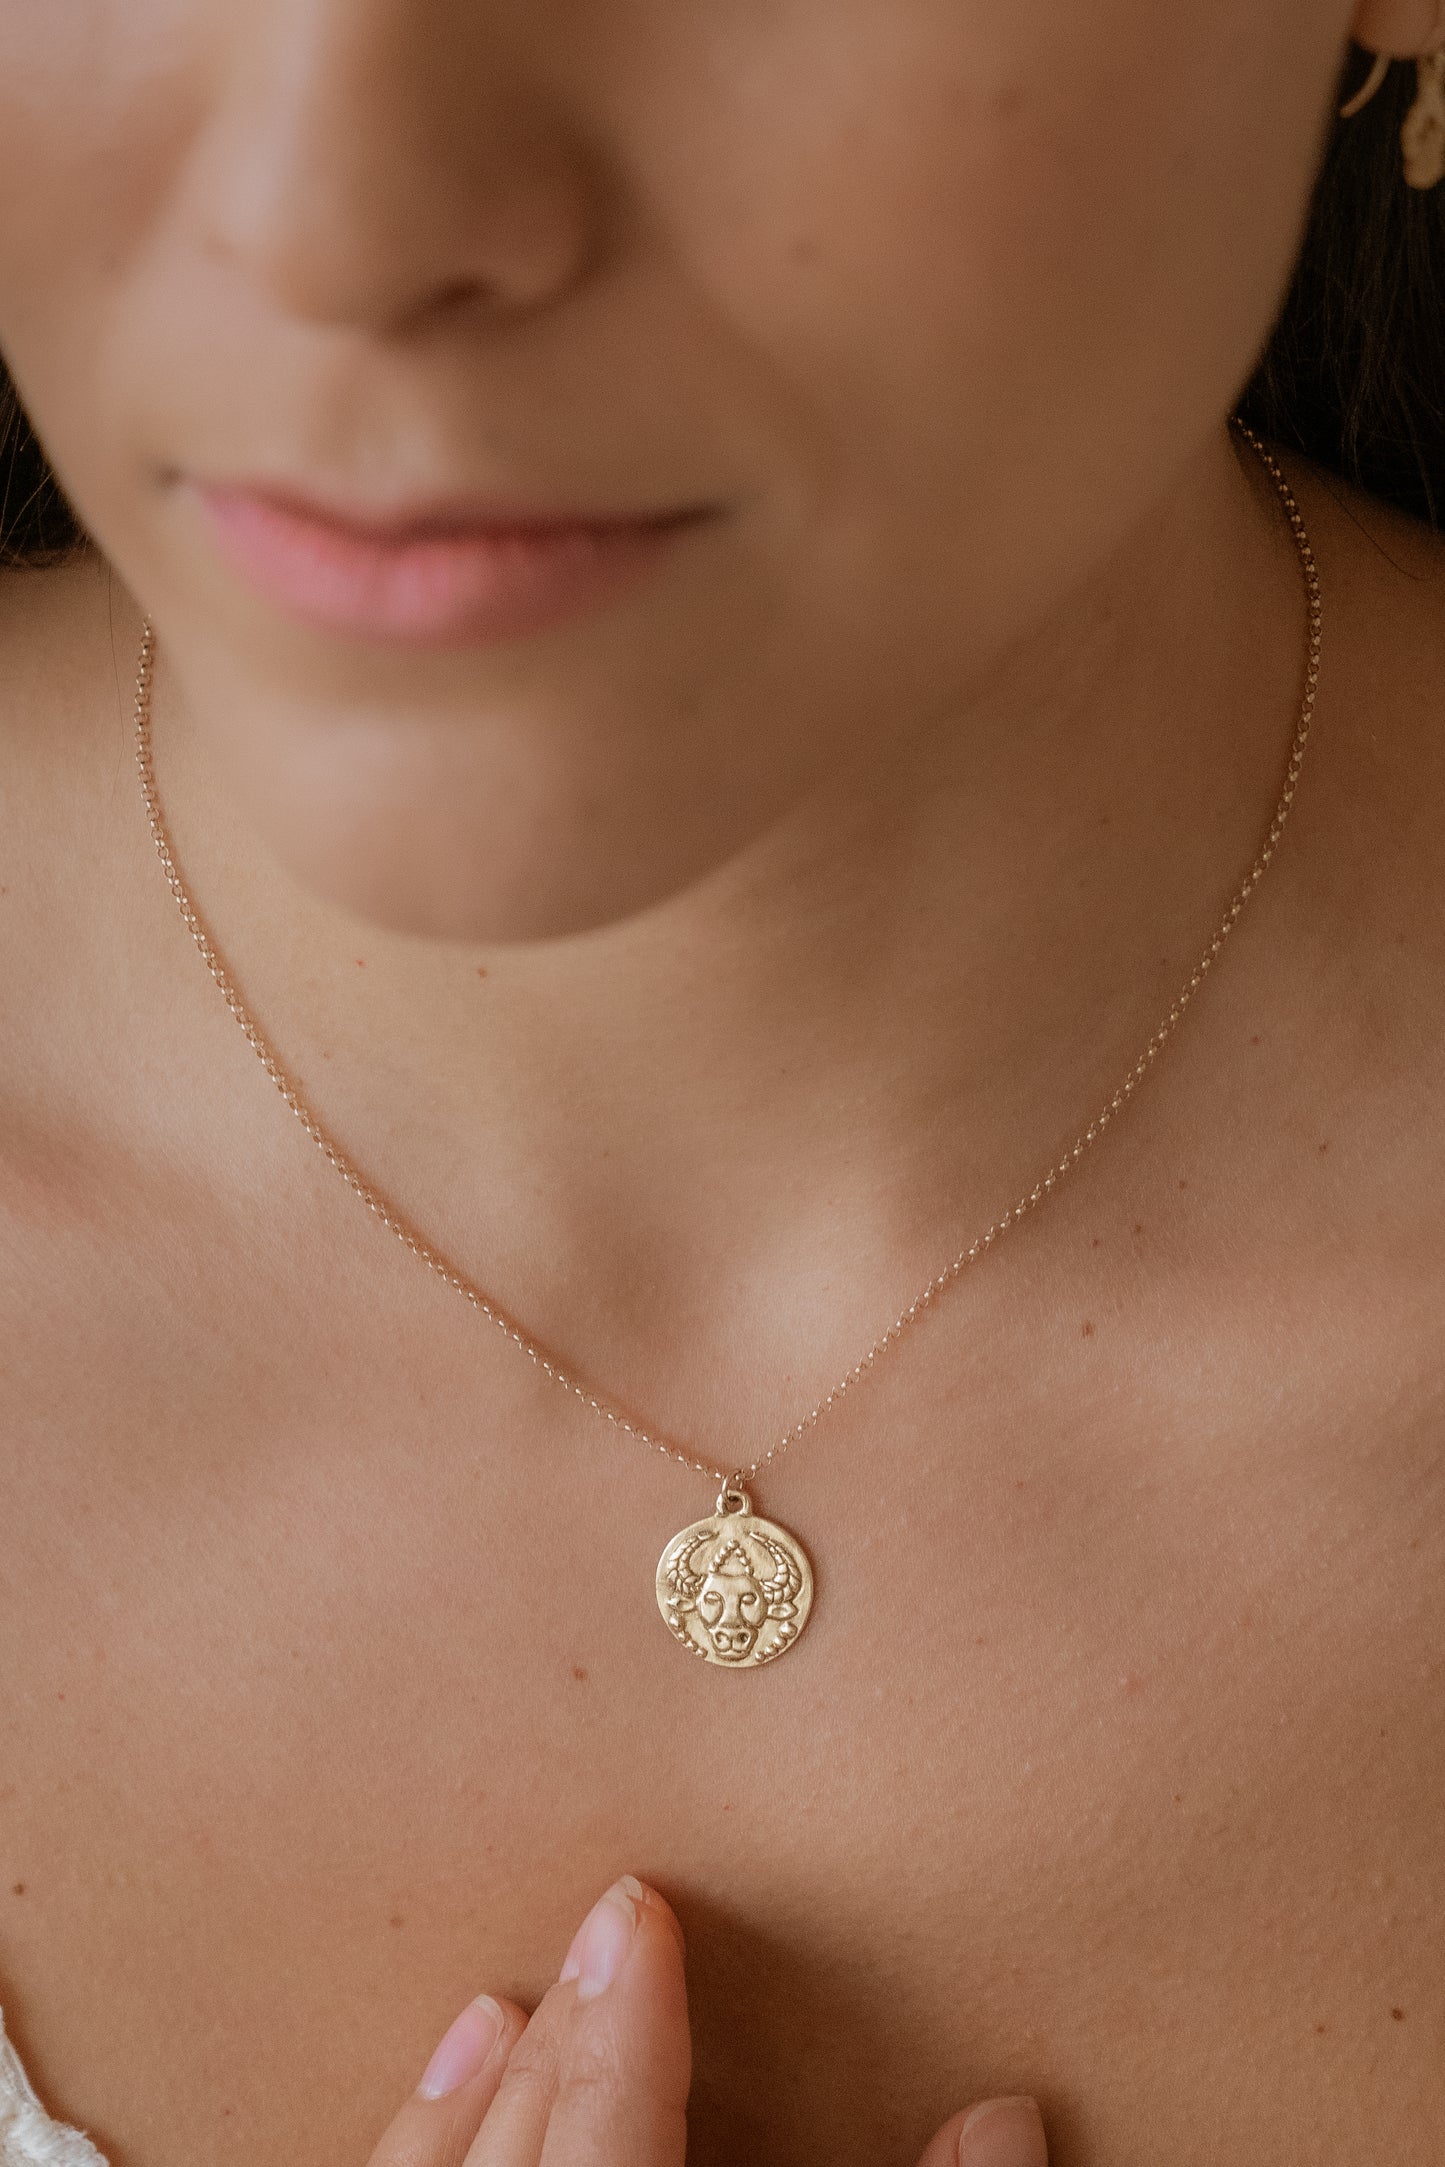 The second sign of the Zodiac, Earth sign Taurus seeks beauty and gives love fearlessly. A hand-carved bull, spiritual and wise, graces this pendant—creating a necklace that captures the power of the celestial sky. 